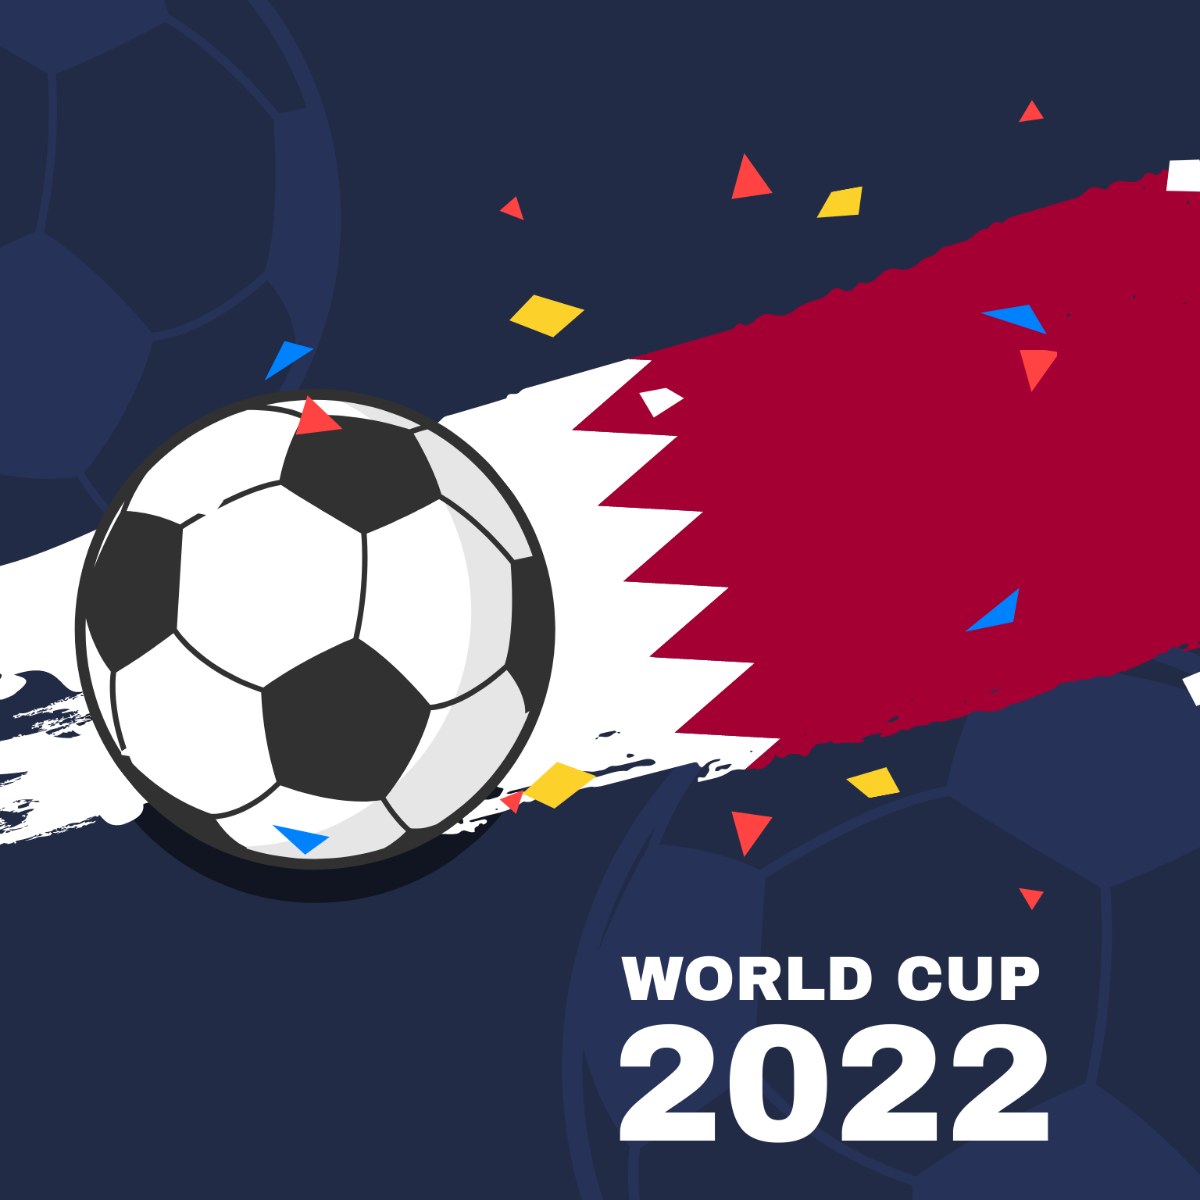 World Cup 2022 Illustration Template